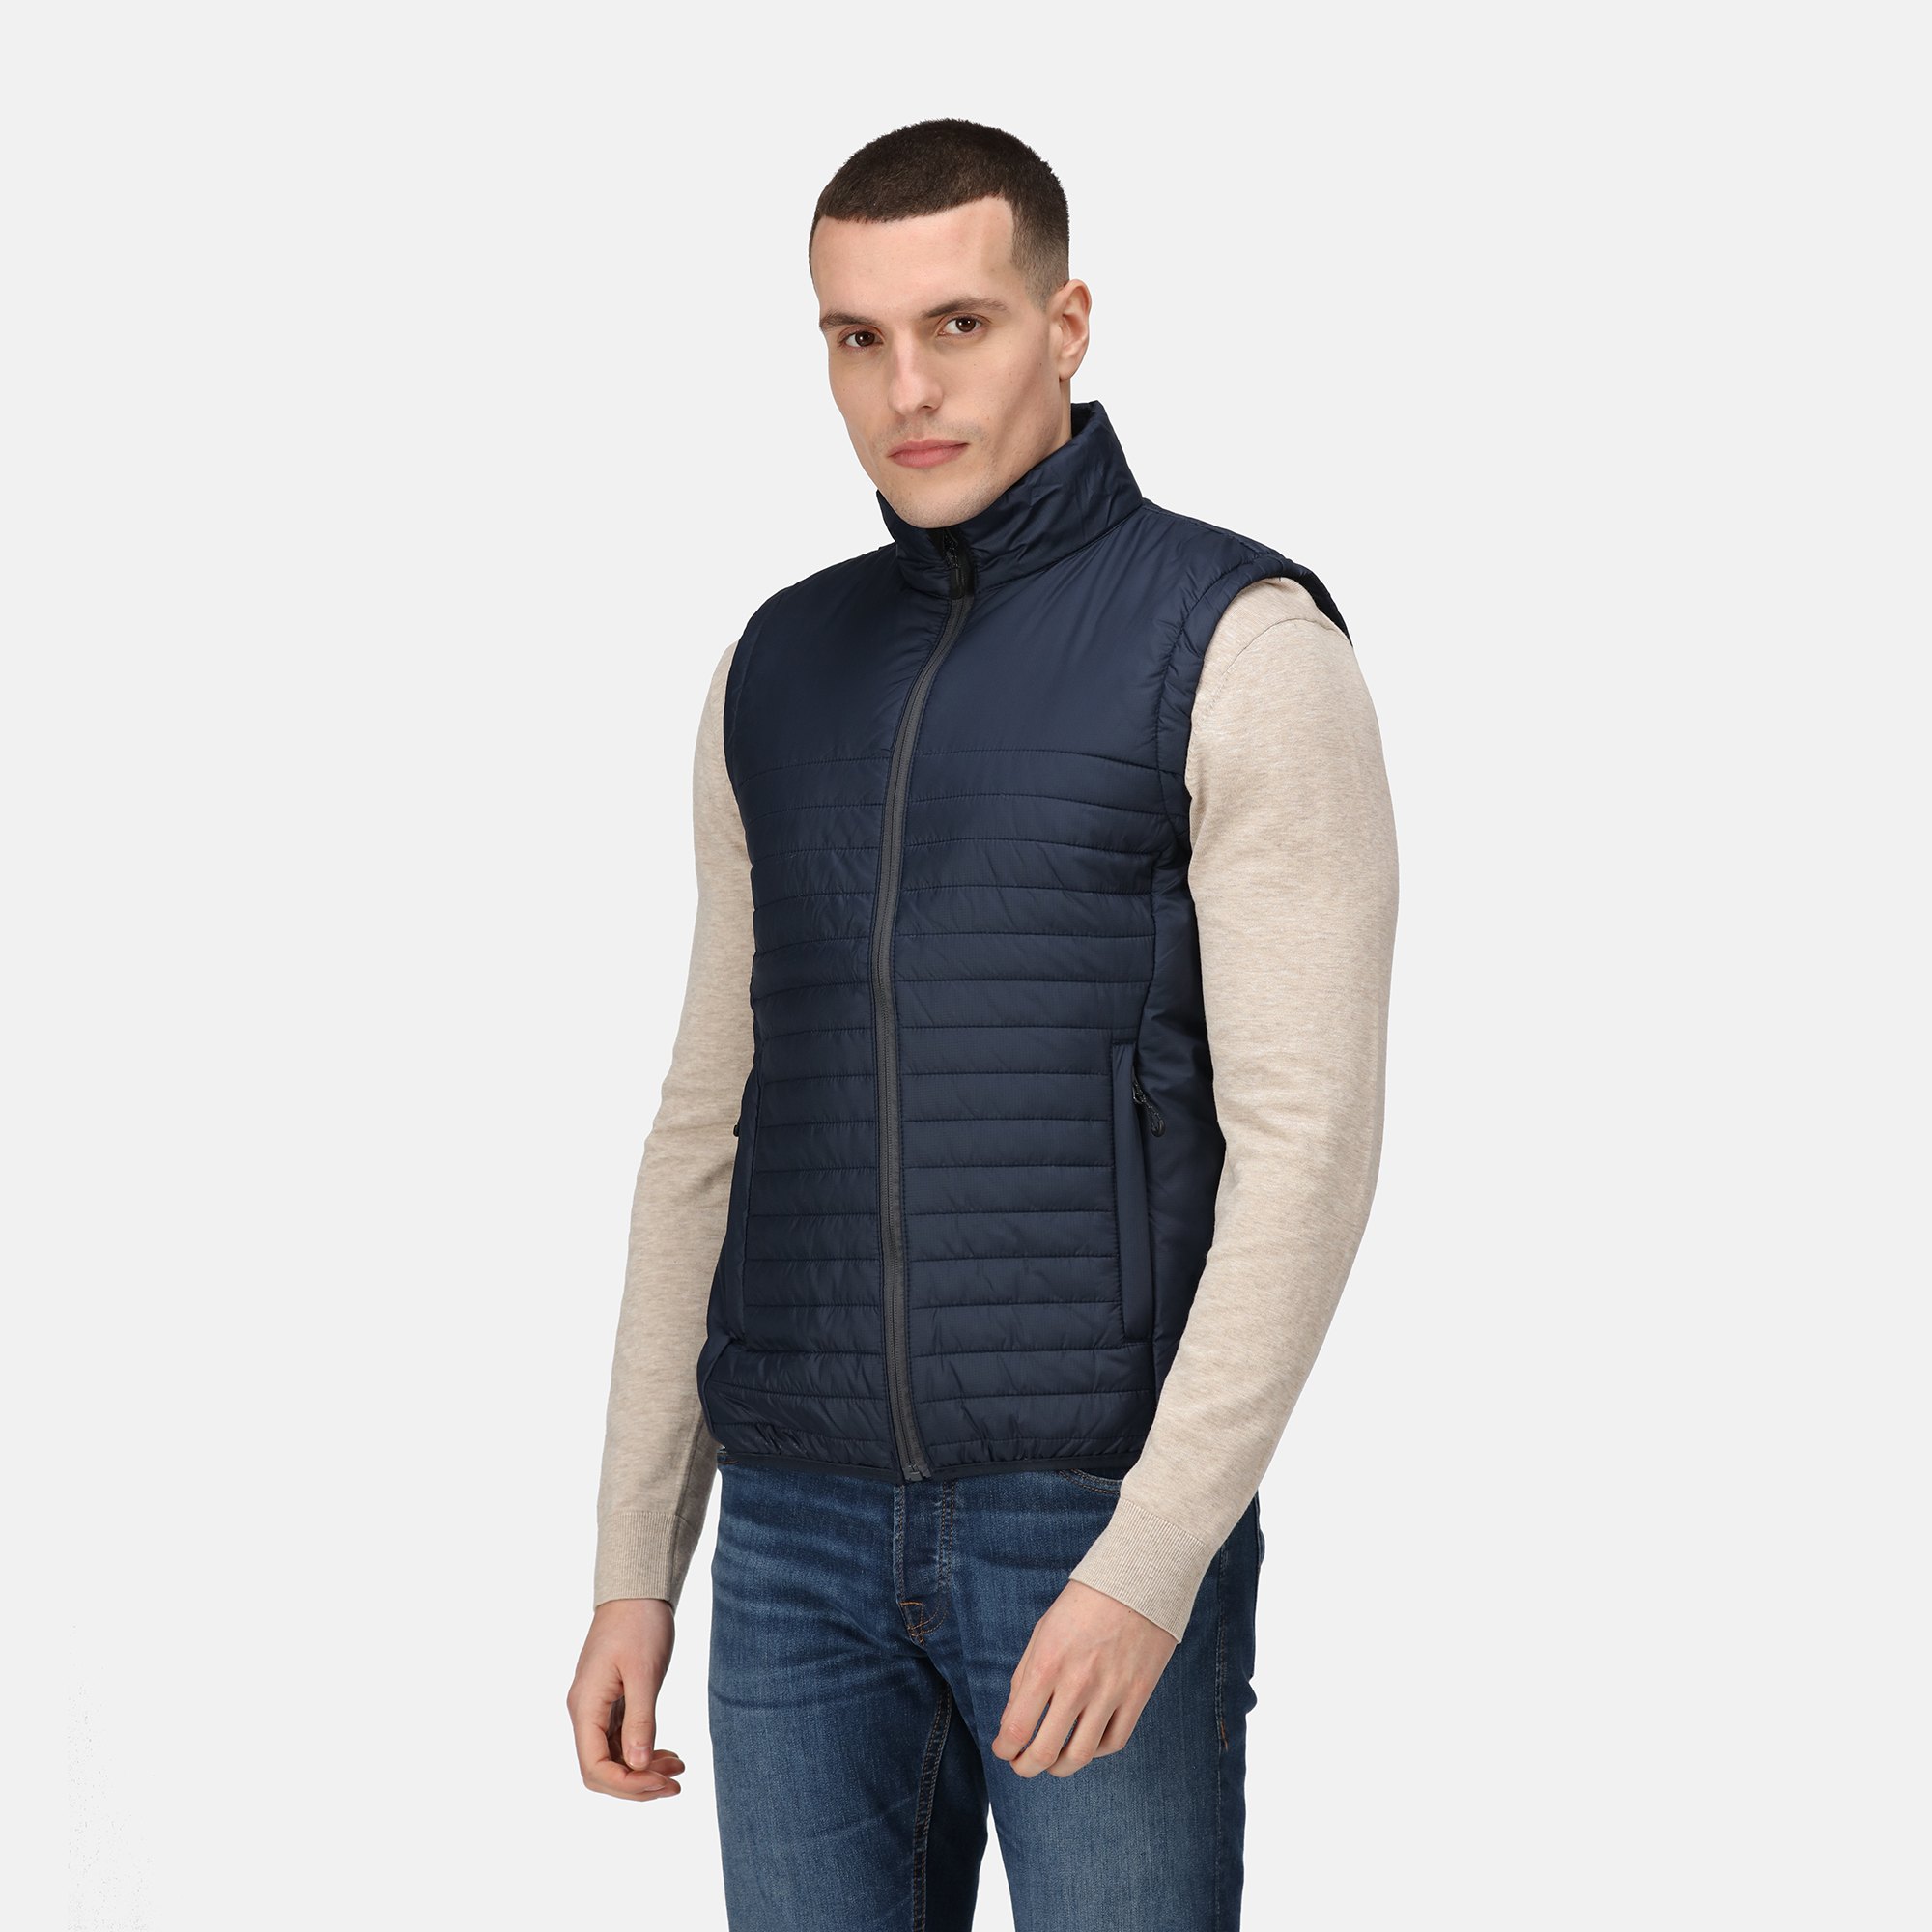 HONESTLY MADE RECYCLED THERMAL BODYWARMER - Regatta Professional